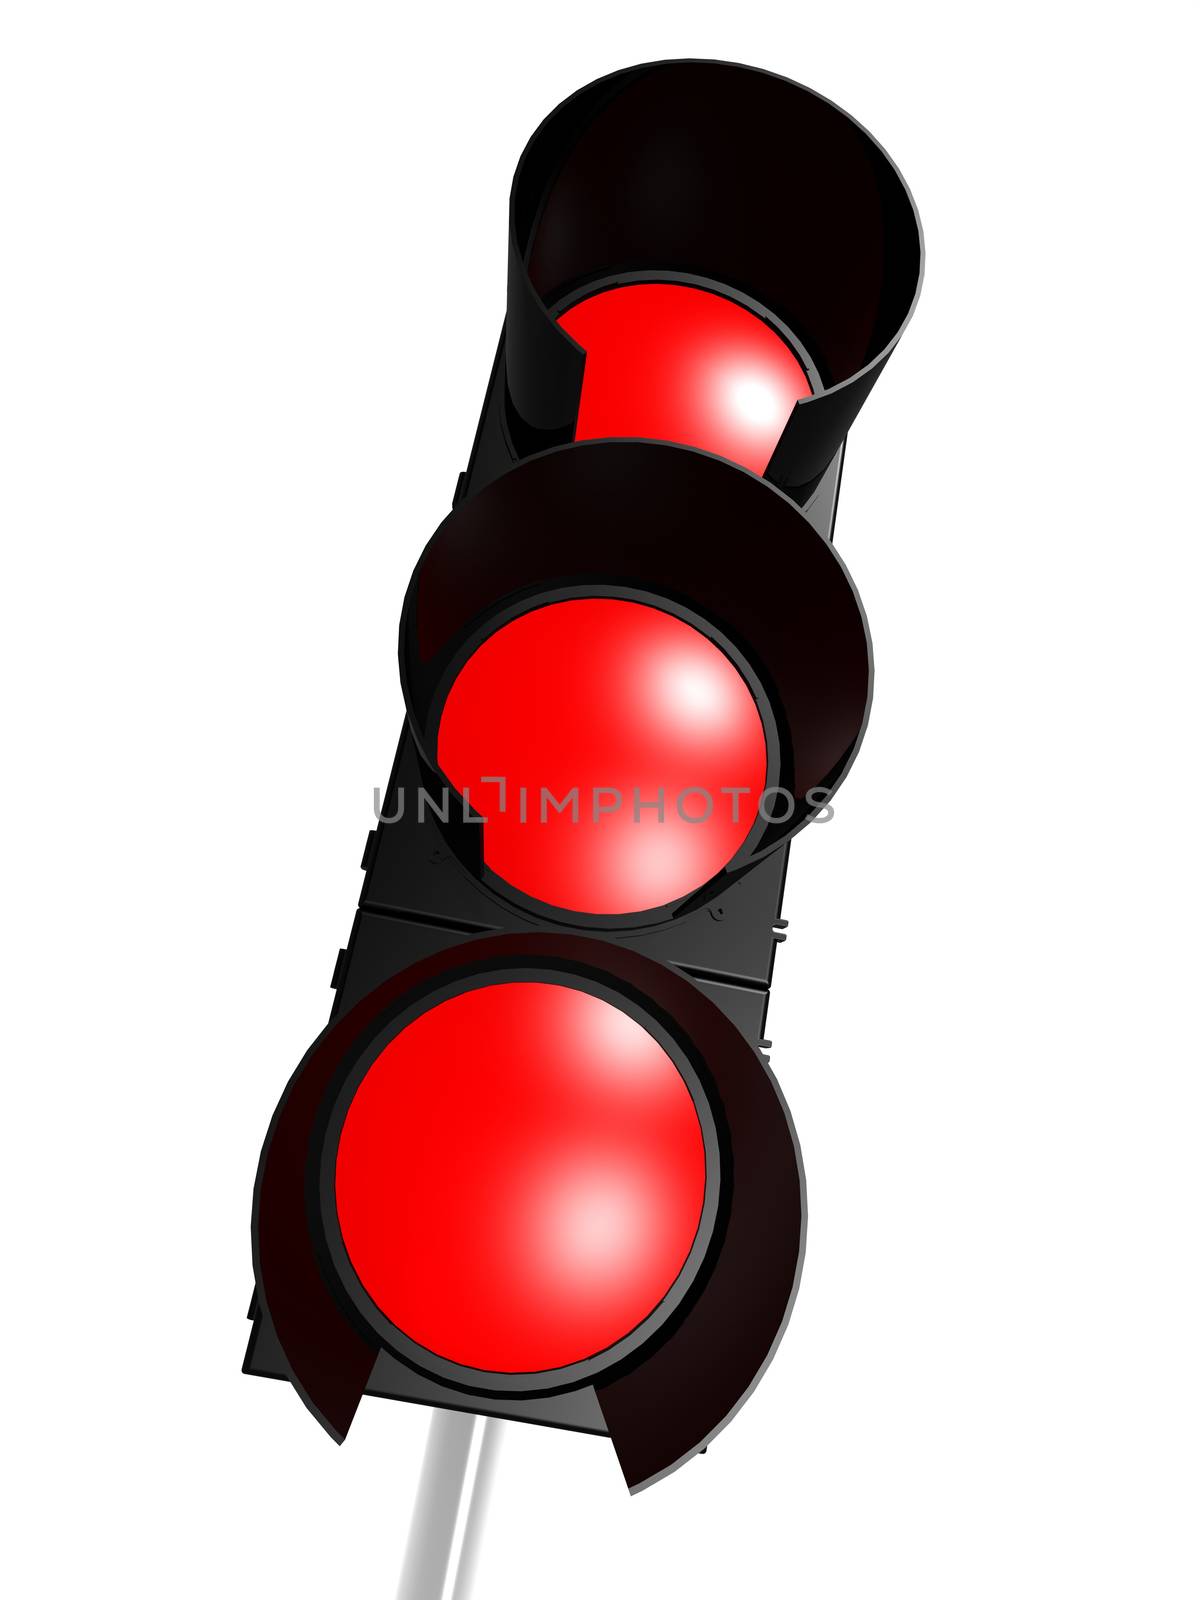 Traffic light with red by tang90246